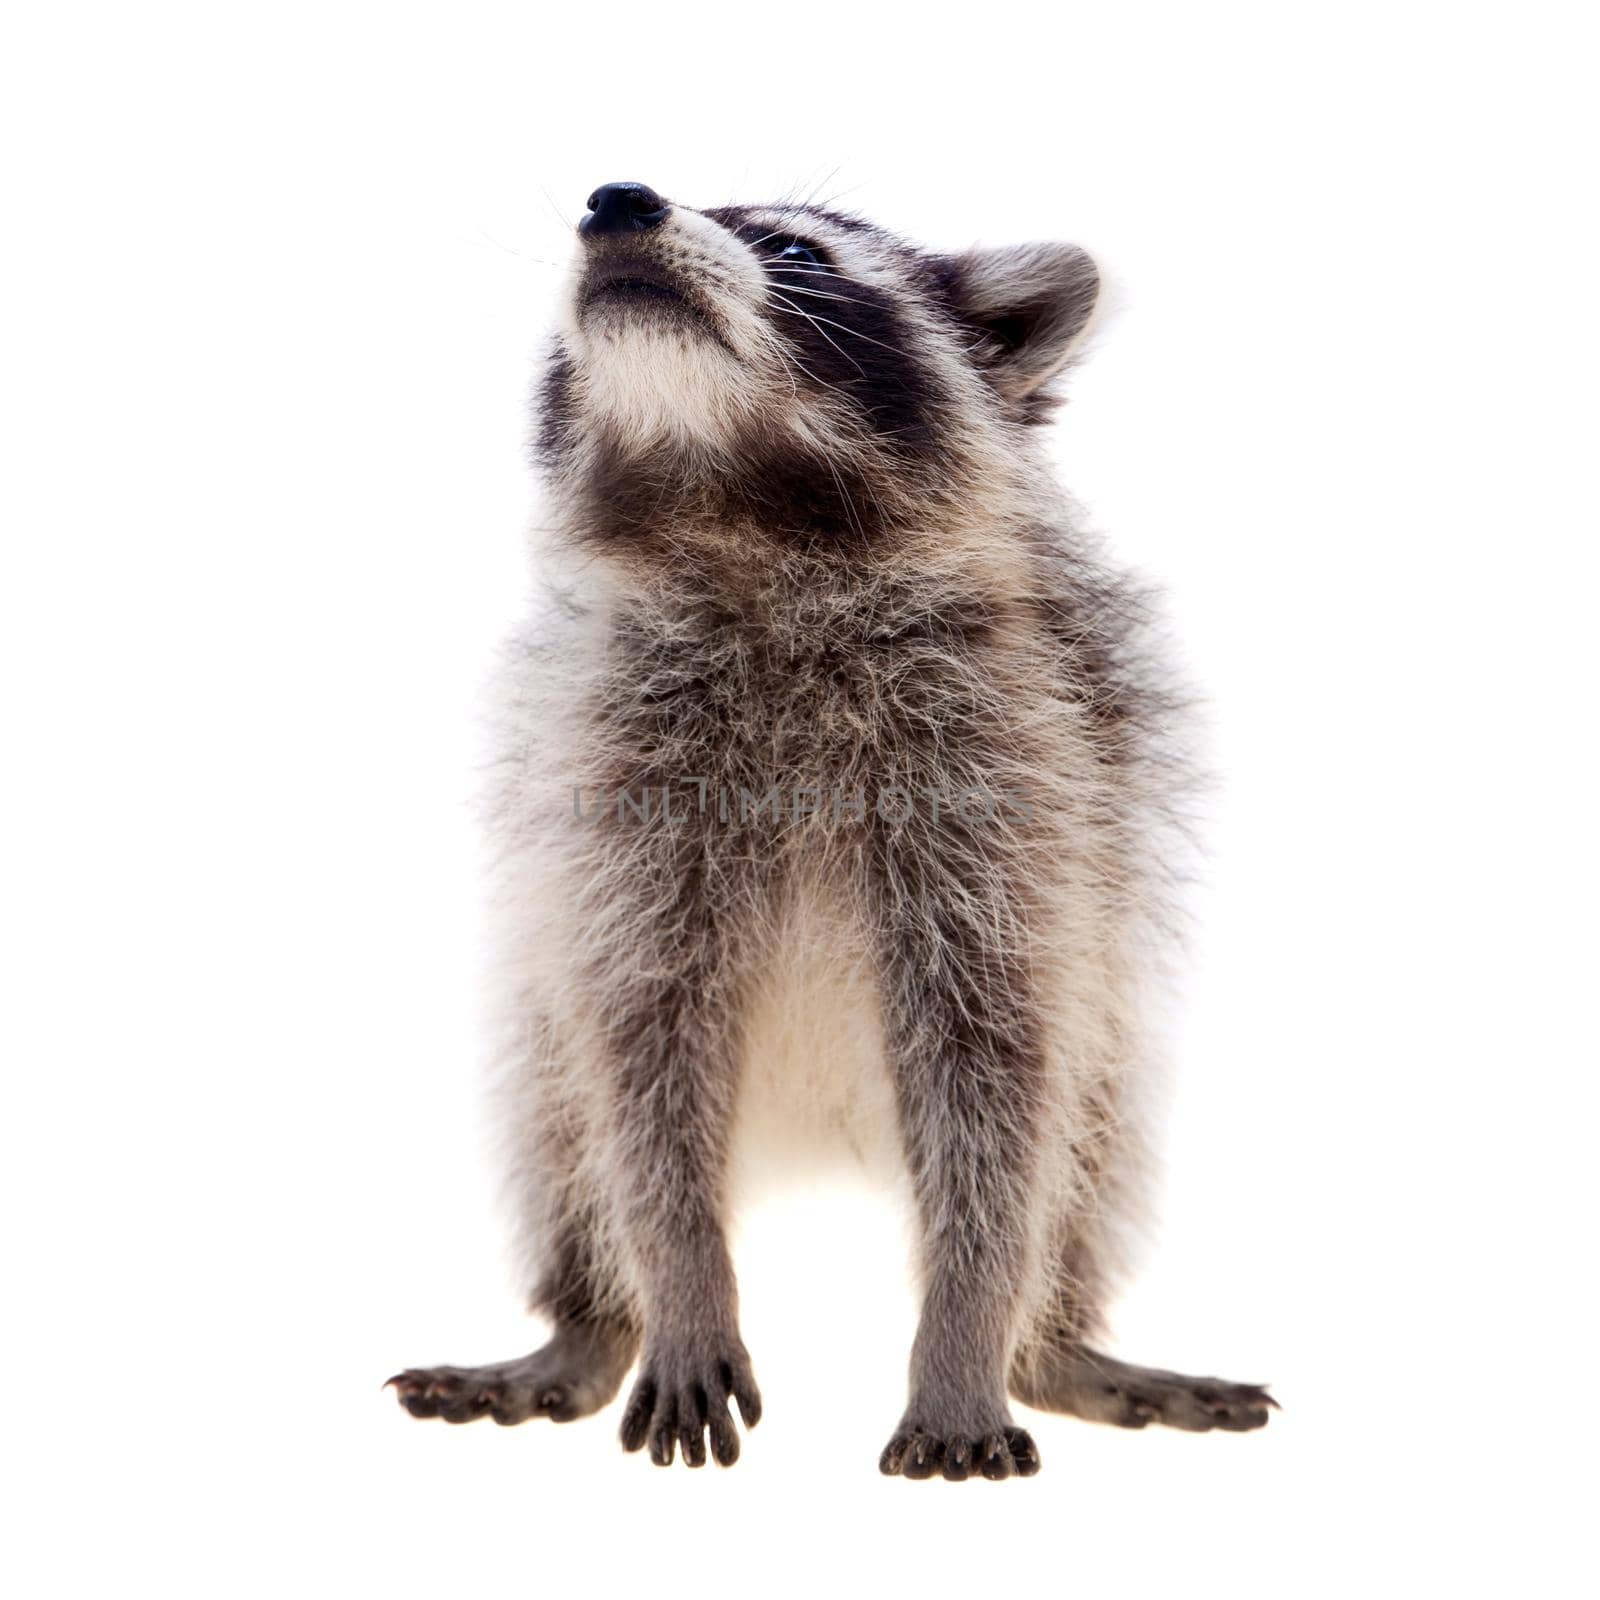 Baby raccoon on white background by RosaJay